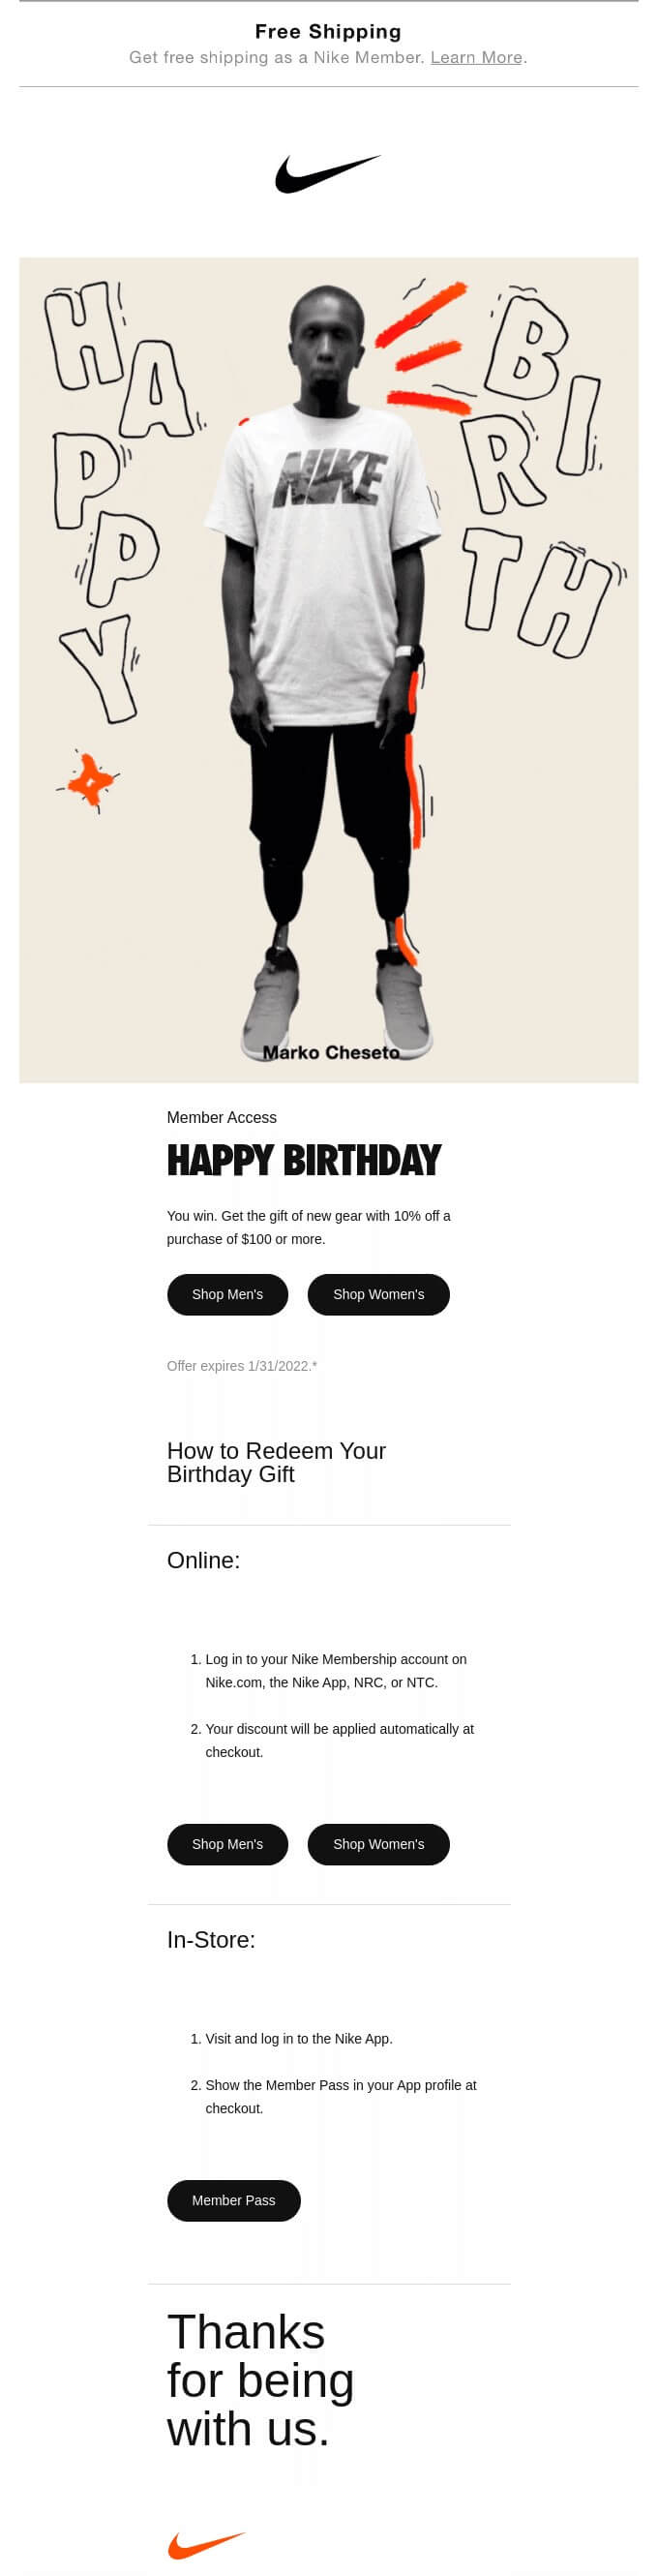 Birthday greeting email from Nike with promo code